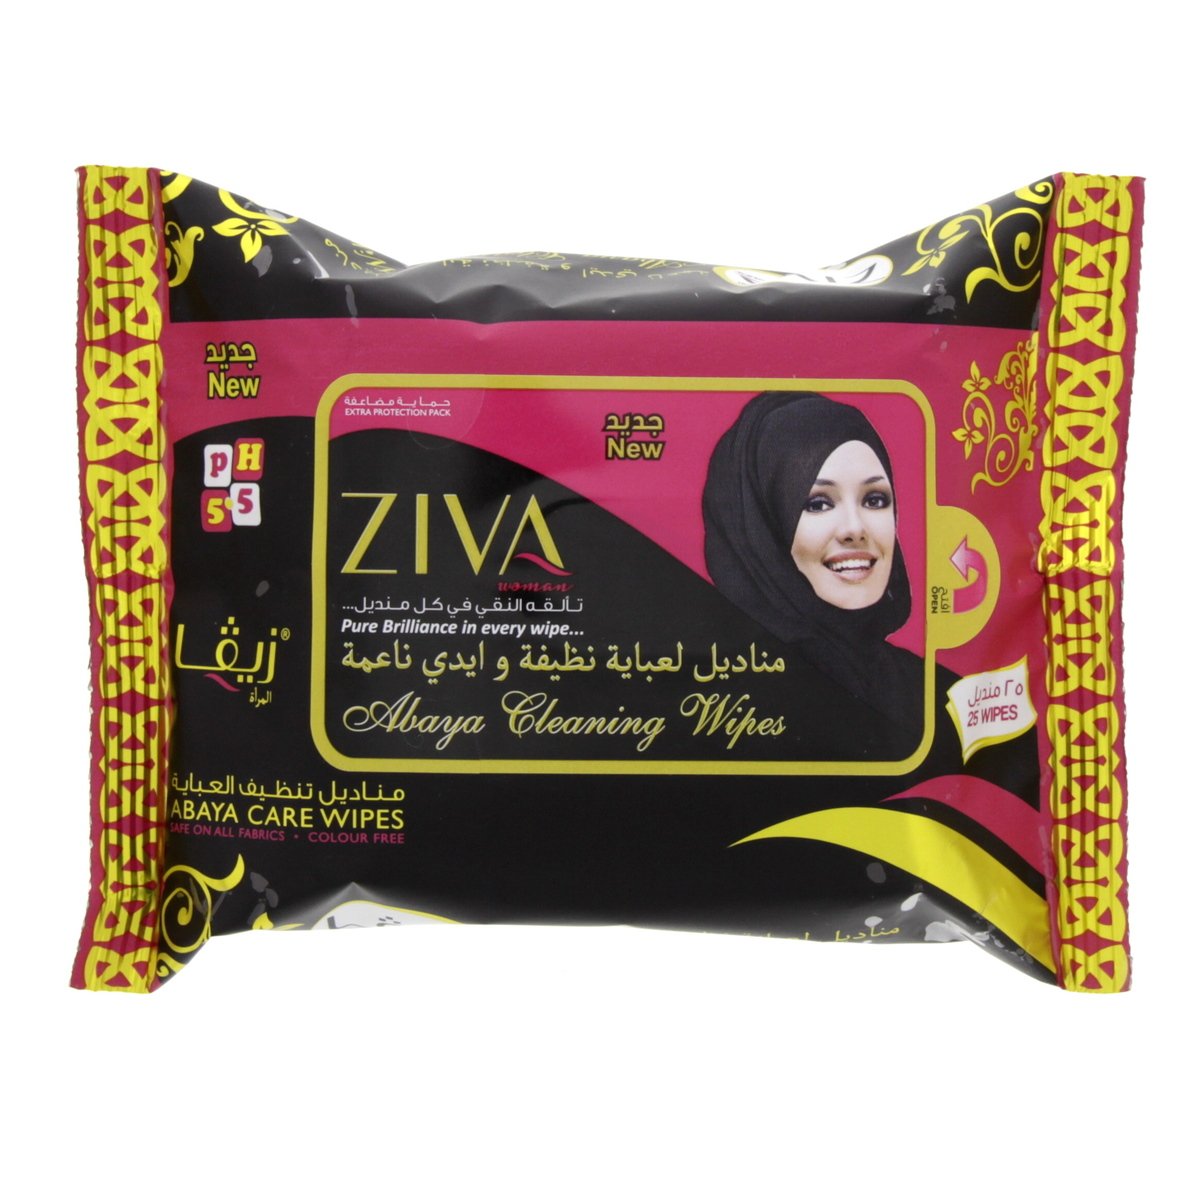 Buy Ziva Abaya Cleaning Wipes 25pcs Online at Best Price | Disp.Cleaning Wipes | Lulu UAE in Kuwait